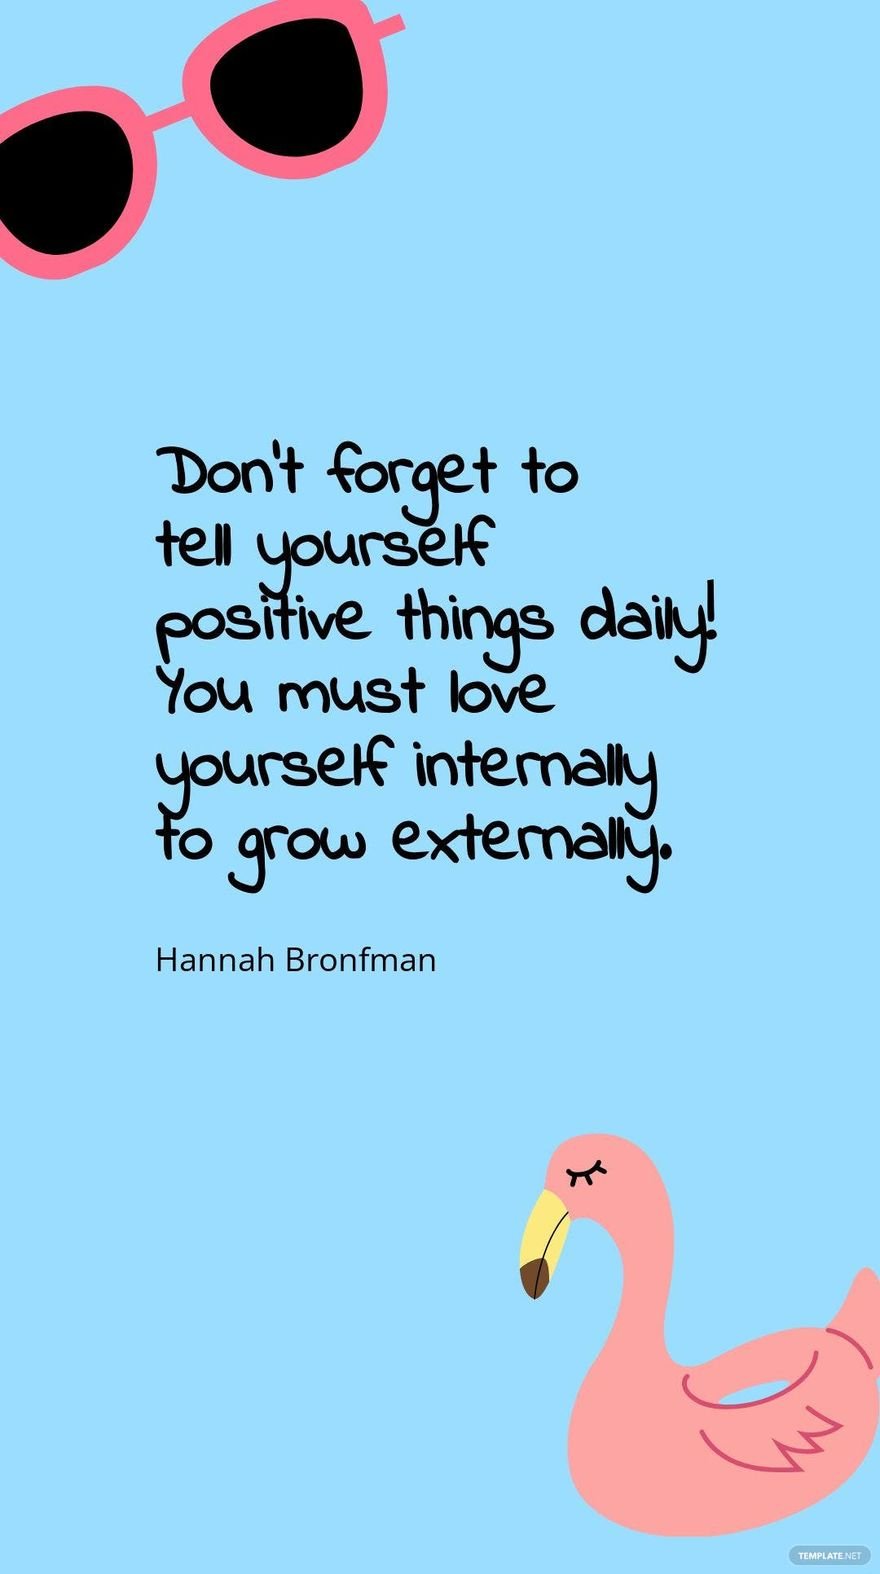 Hannah Bronfman - Don’t forget to tell yourself positive things daily! You must love yourself internally to grow externally.